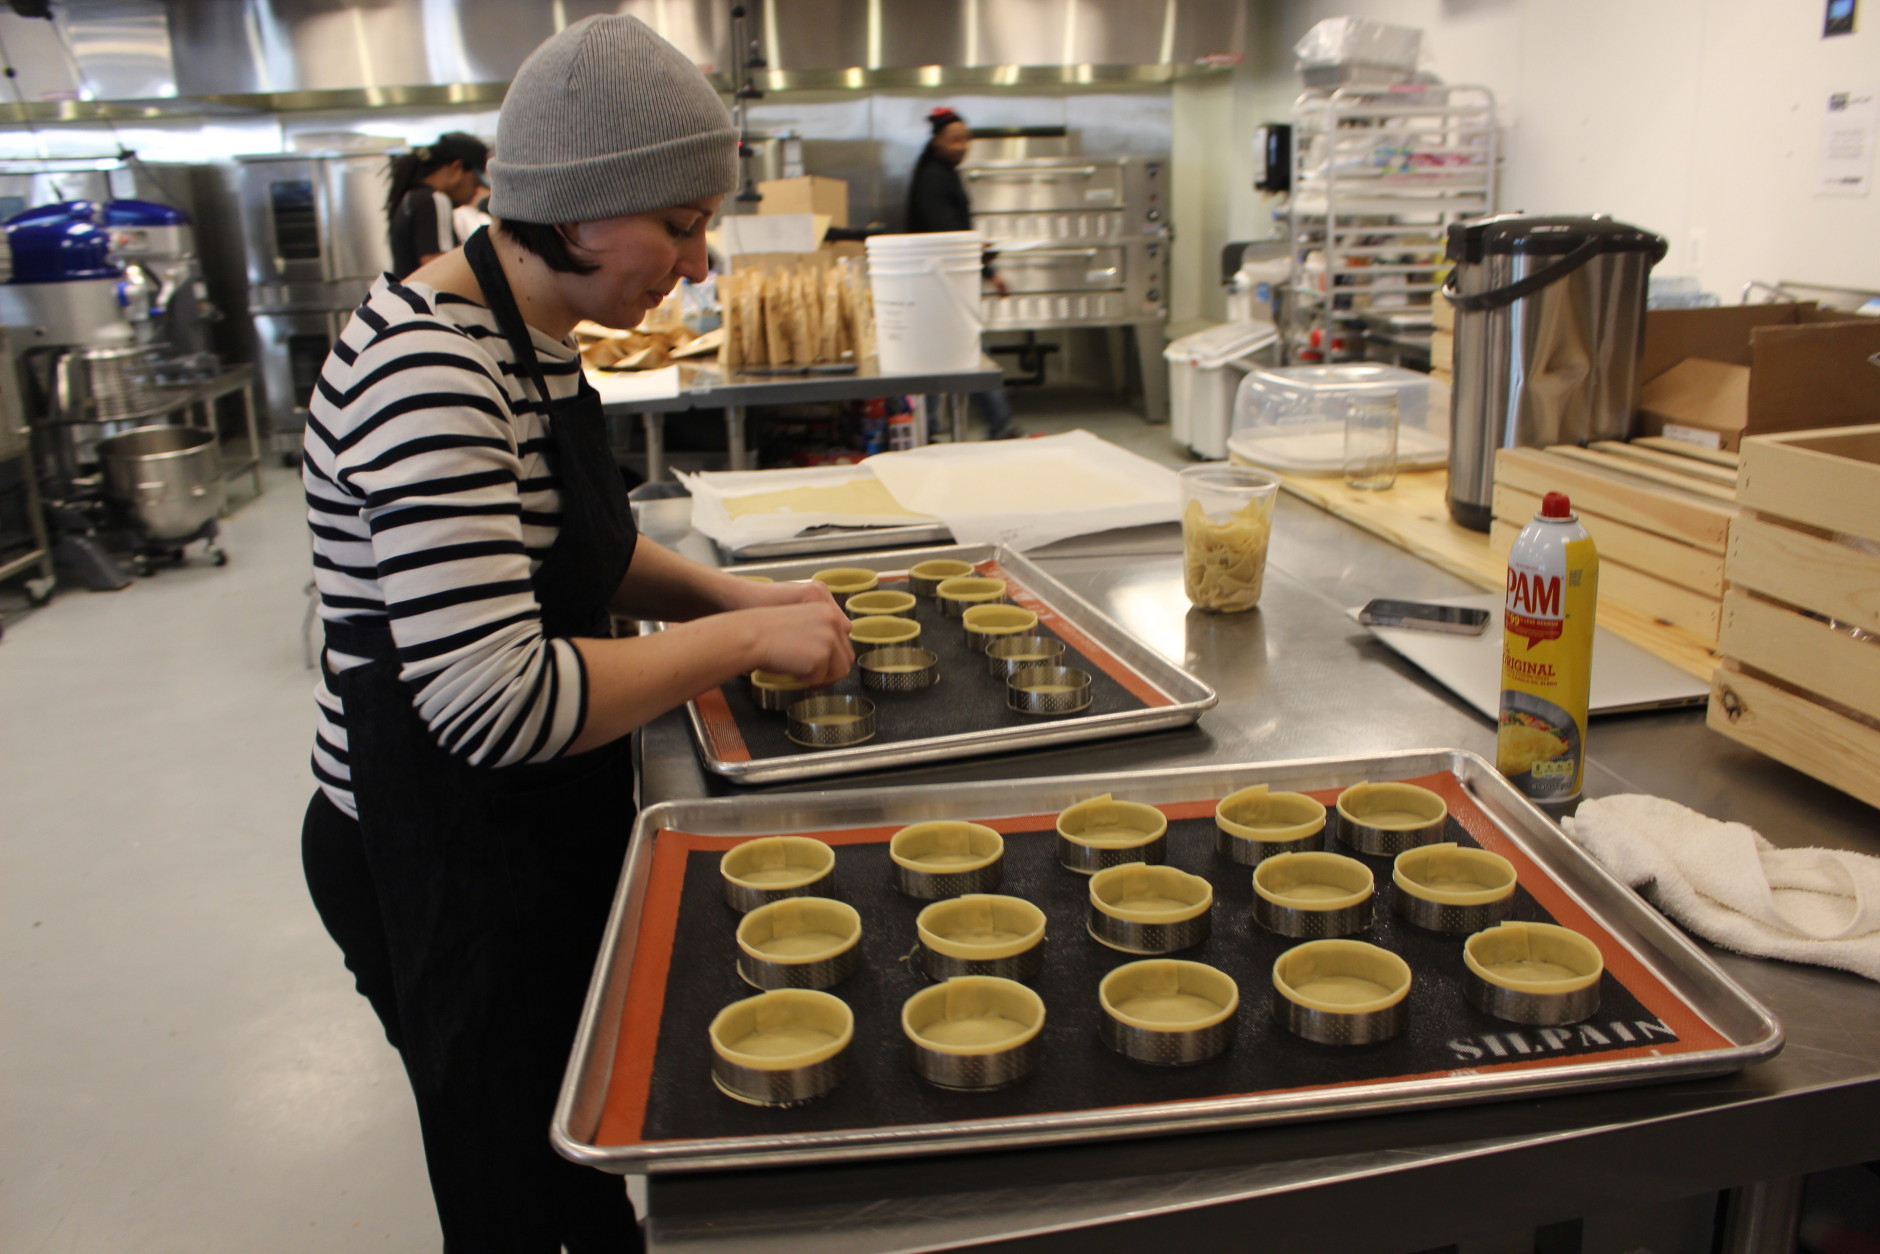 A Union Kitchen member prepares tiny pastry tins in the communal kitchen. (WTOP/Dana Gooley) 